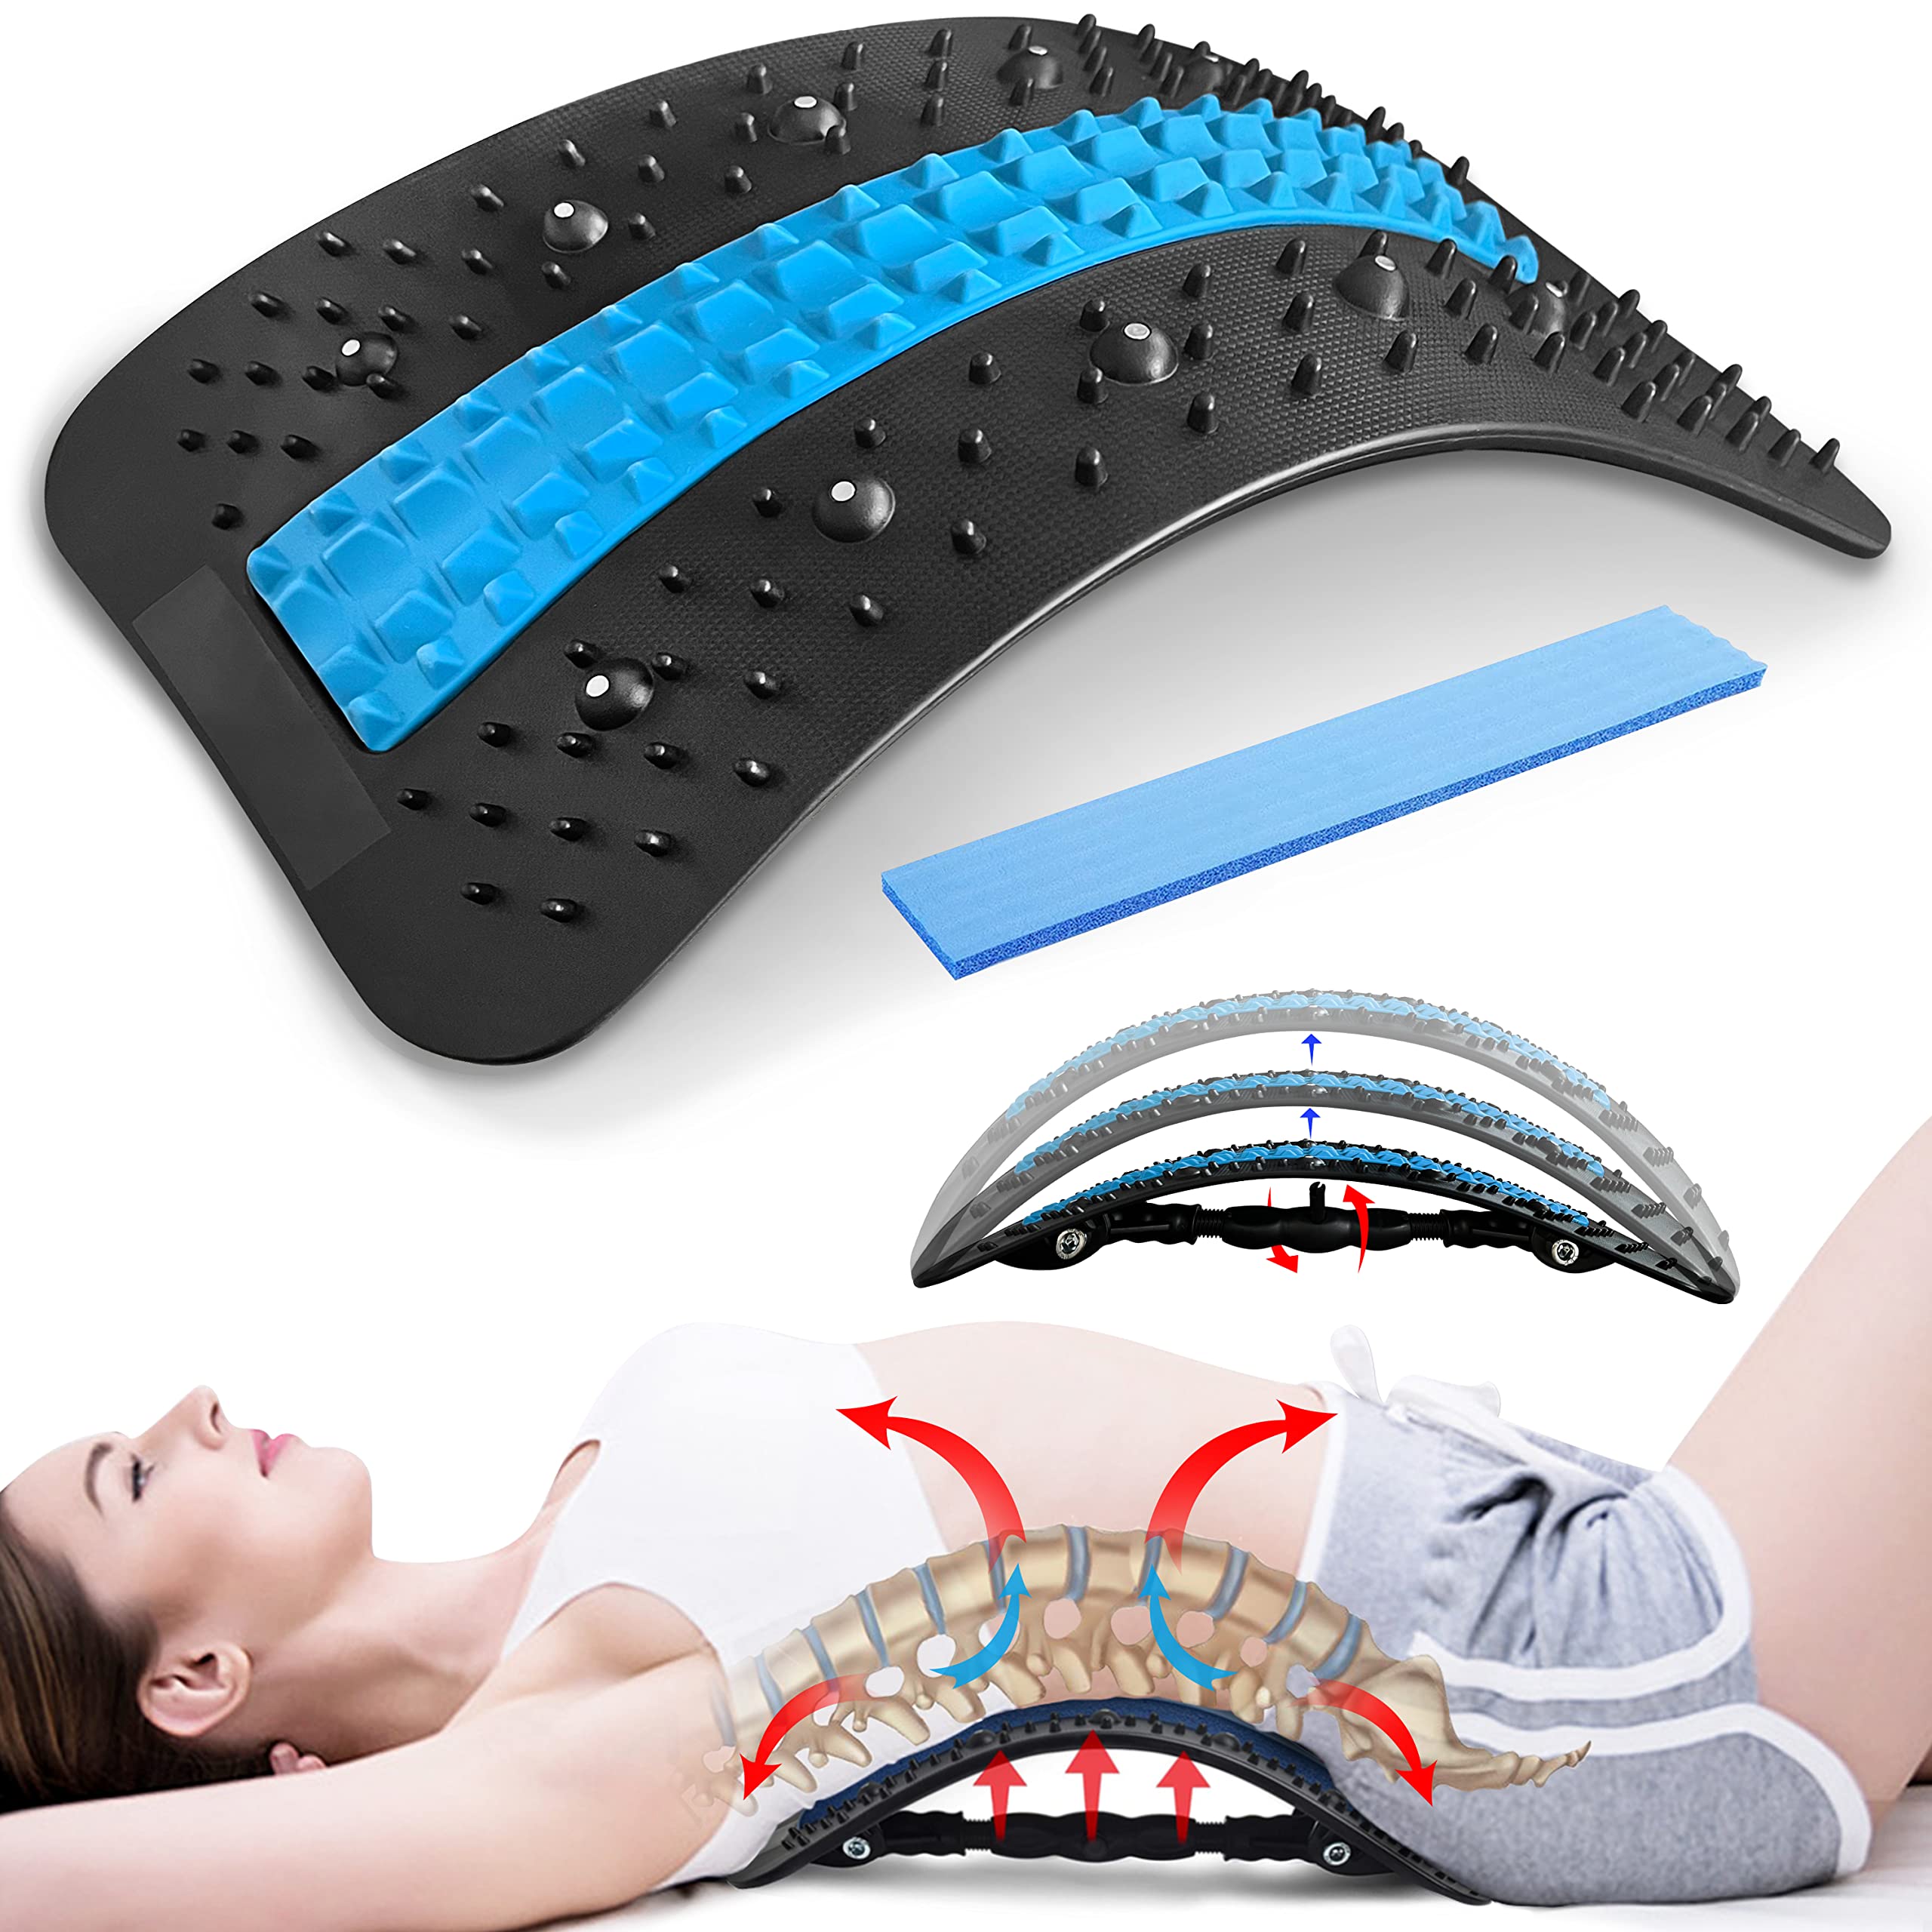 Lower Back Pain Relief: 5 Devices that Work